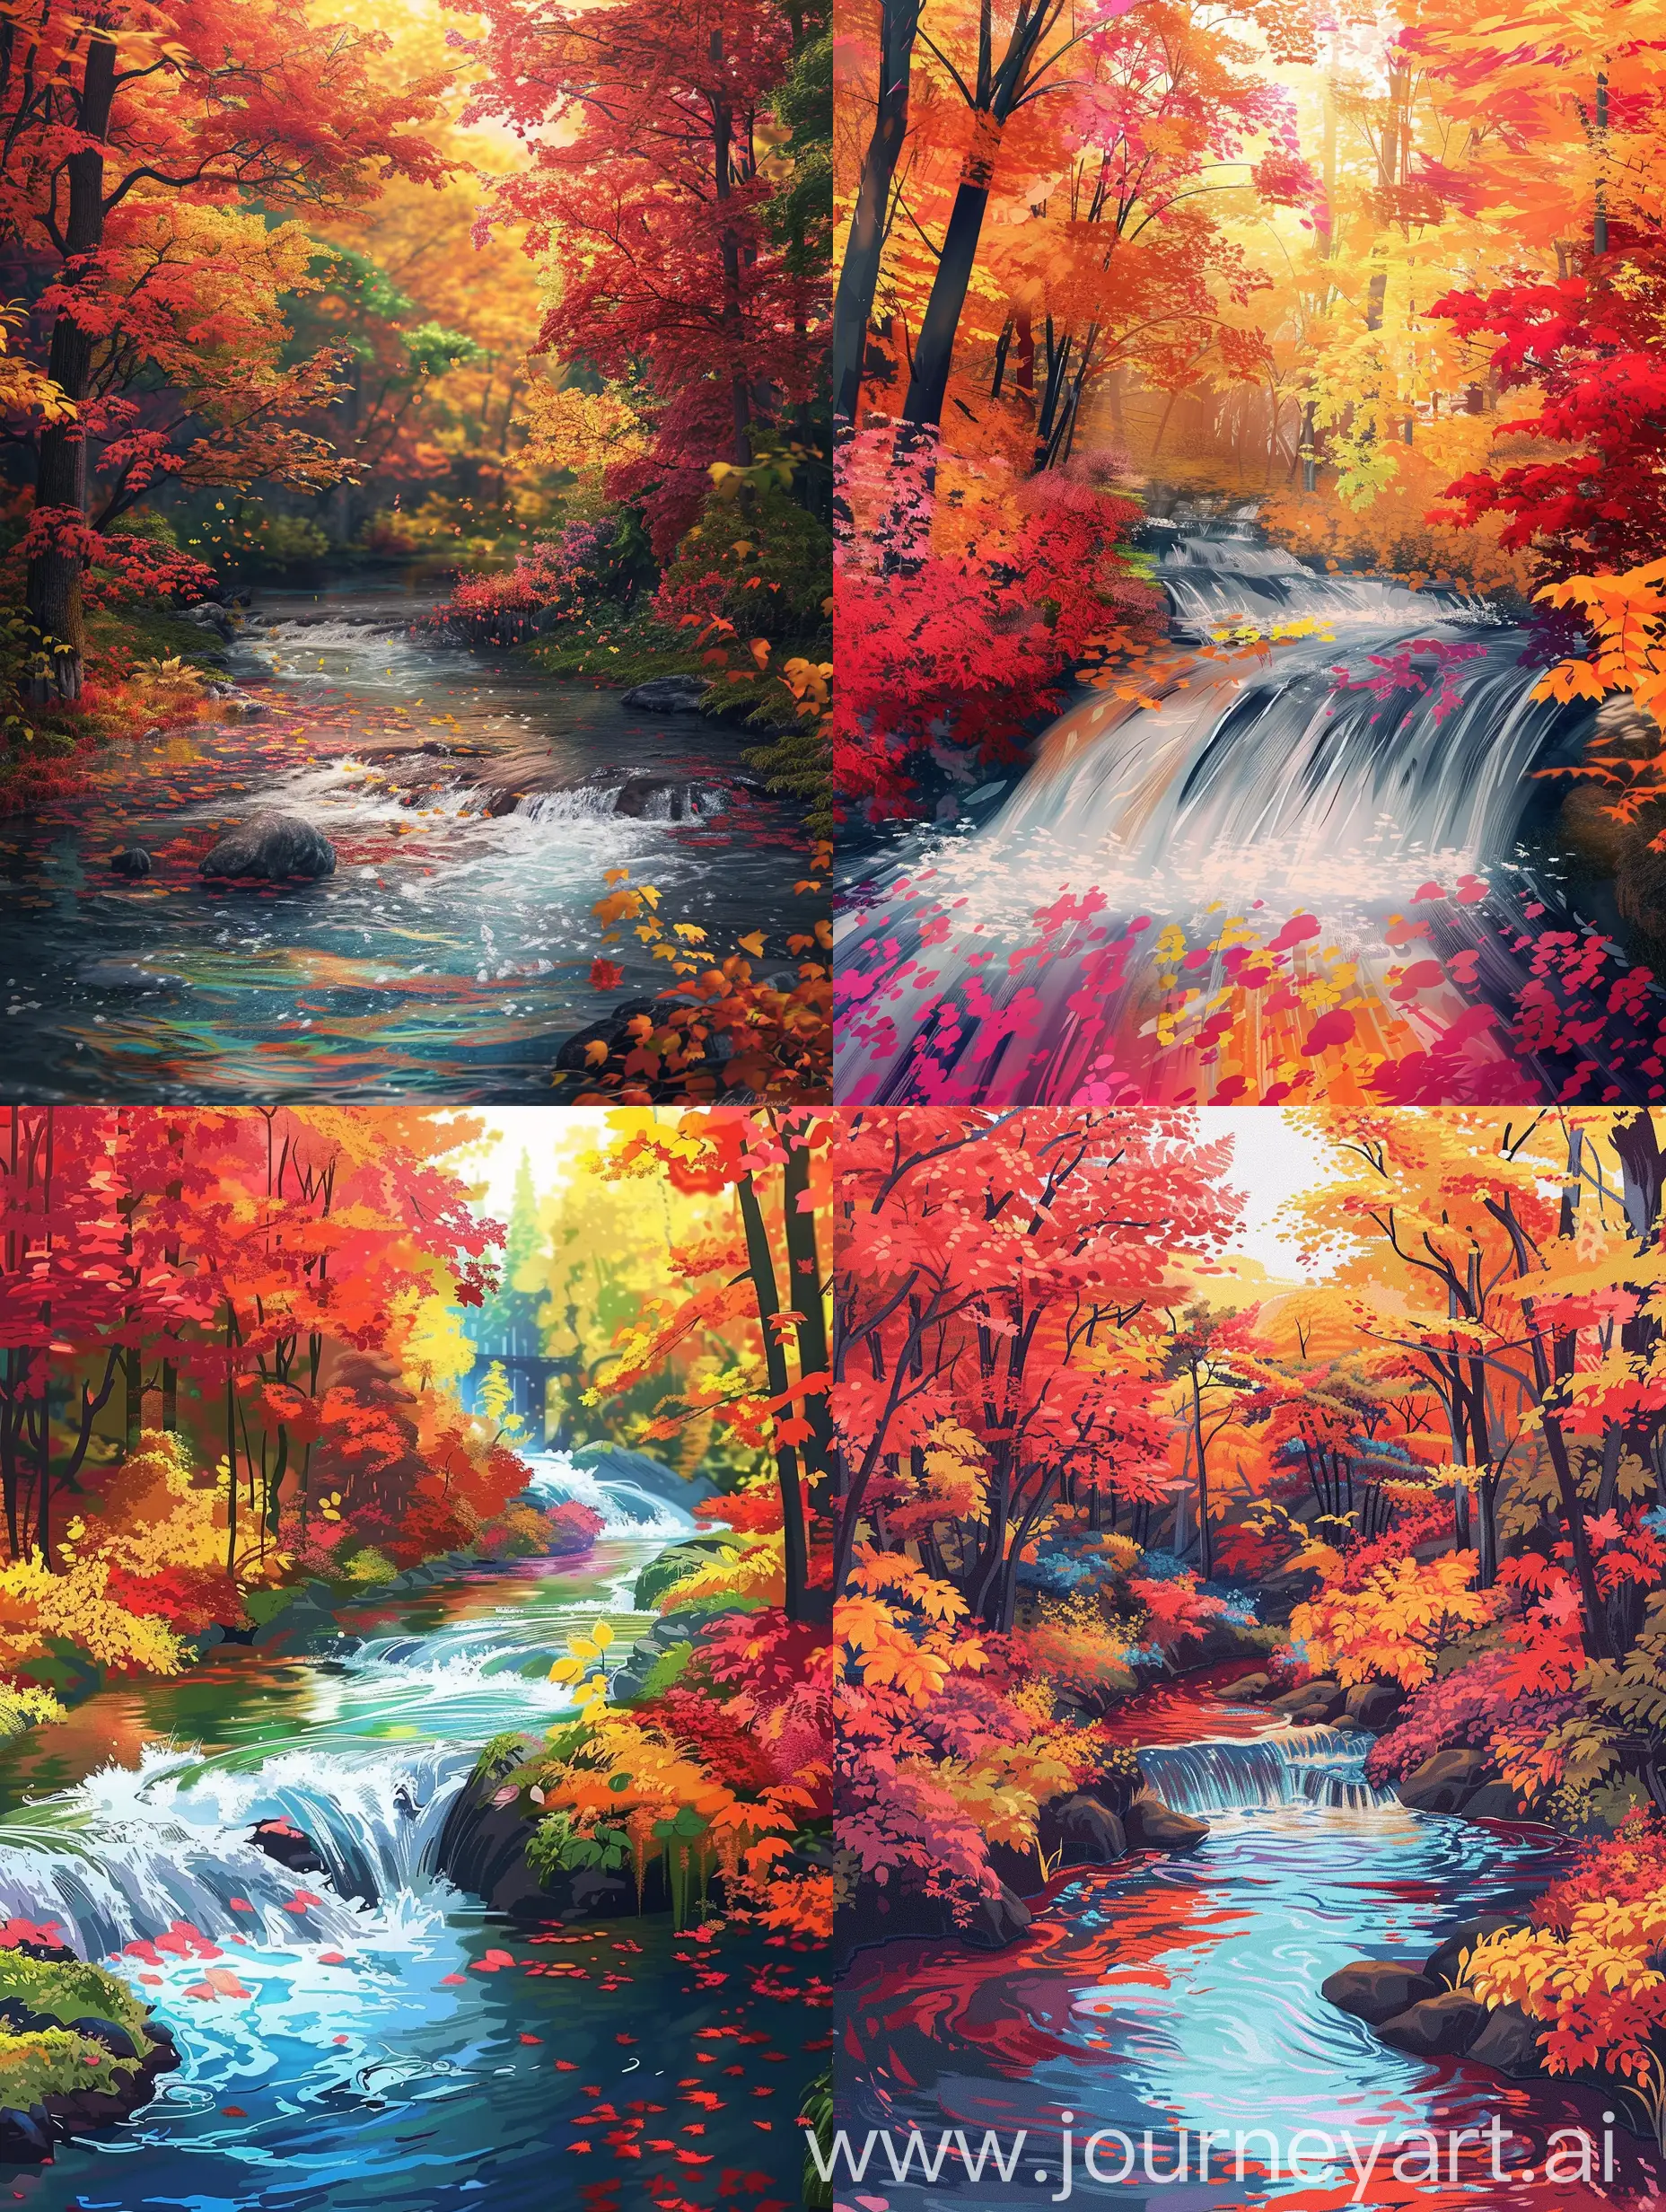 Anime-Style-Autumn-Scene-with-Flowing-Water-and-Colorful-Foliage